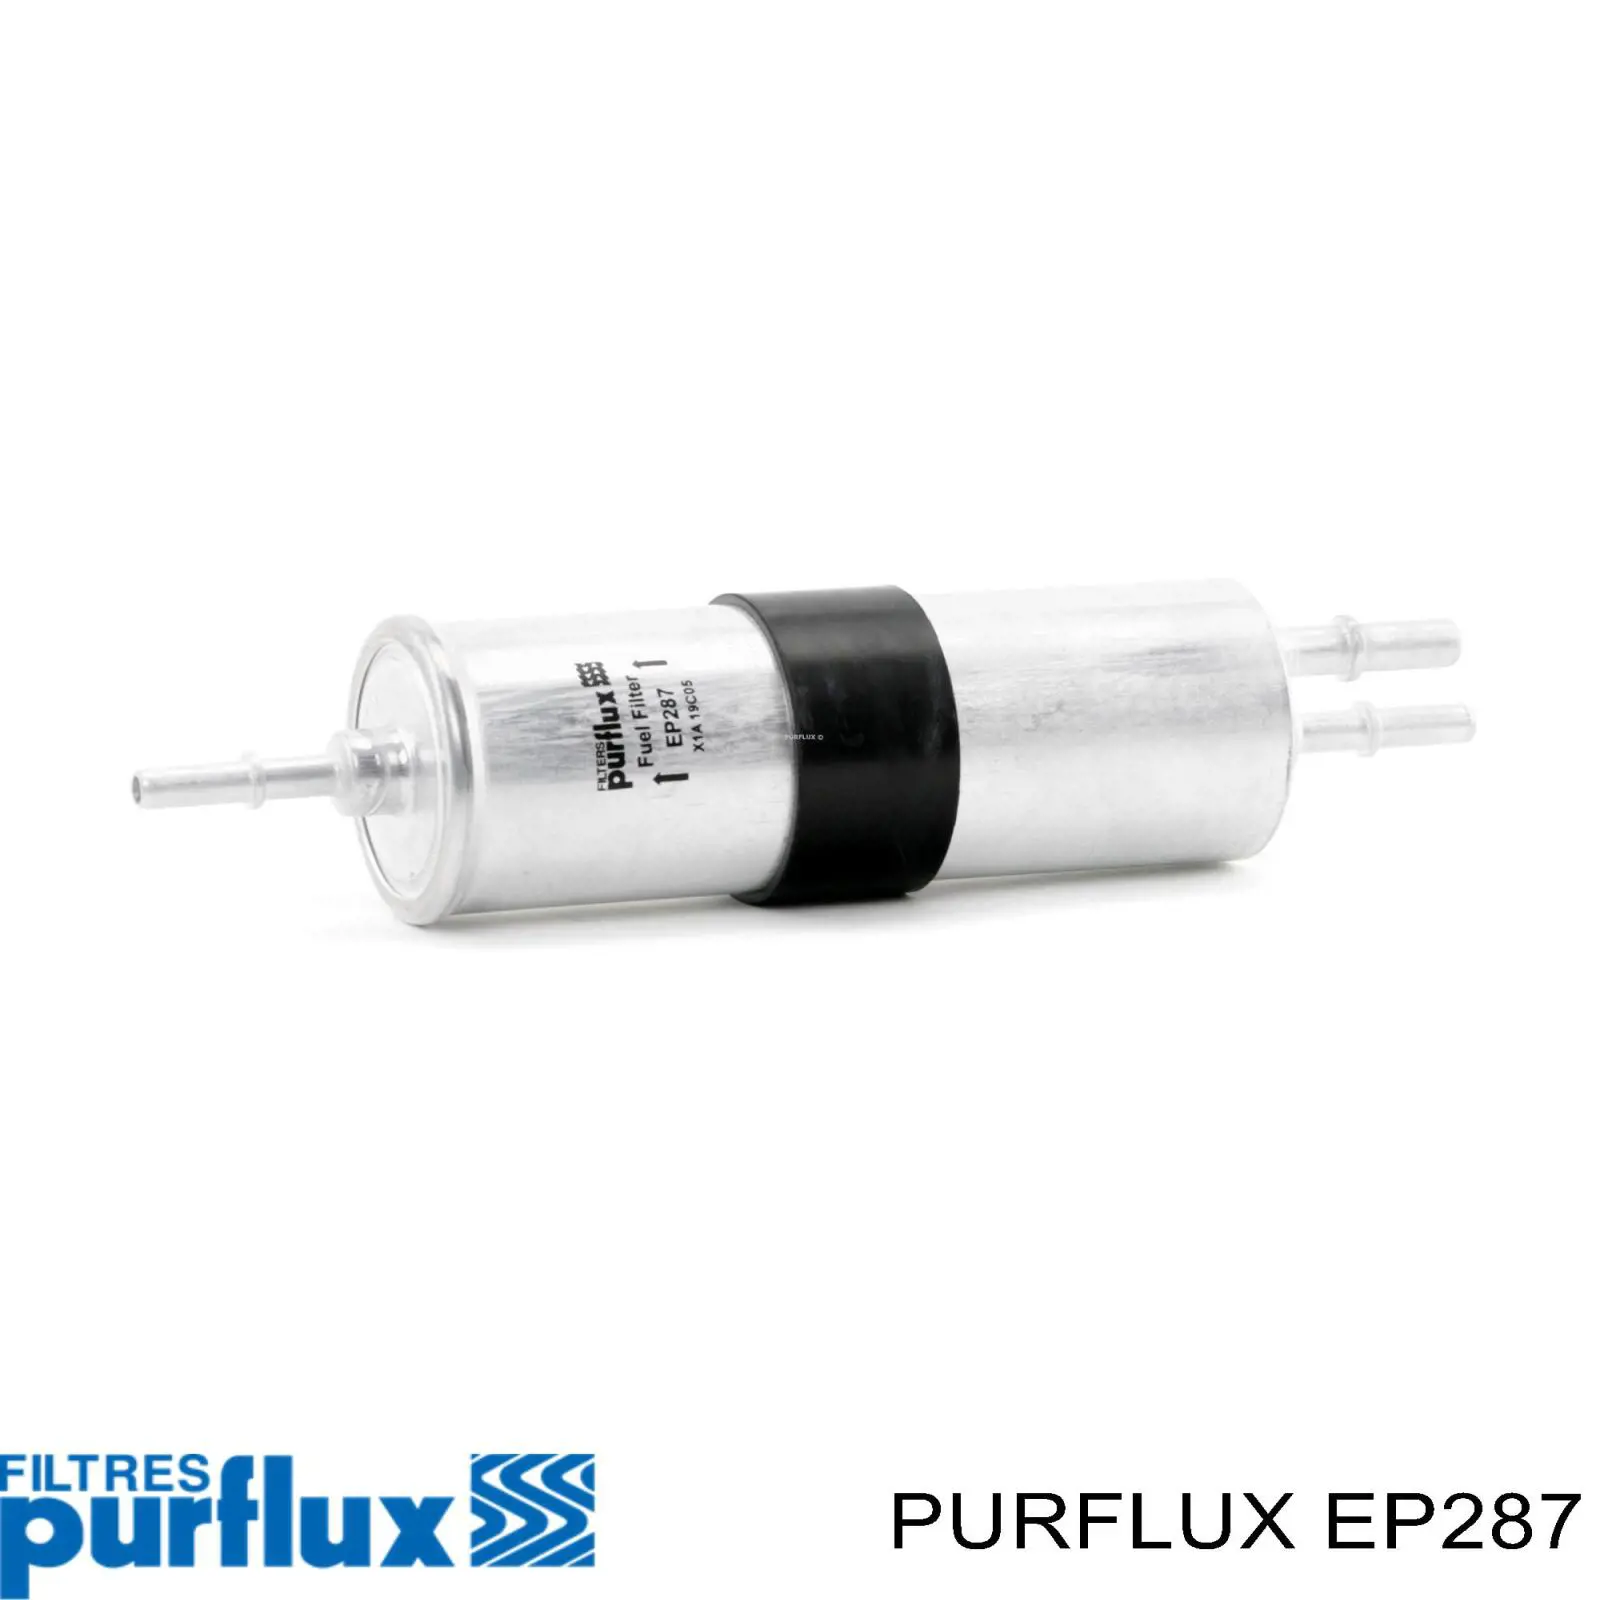 Filtro combustible EP287 Purflux